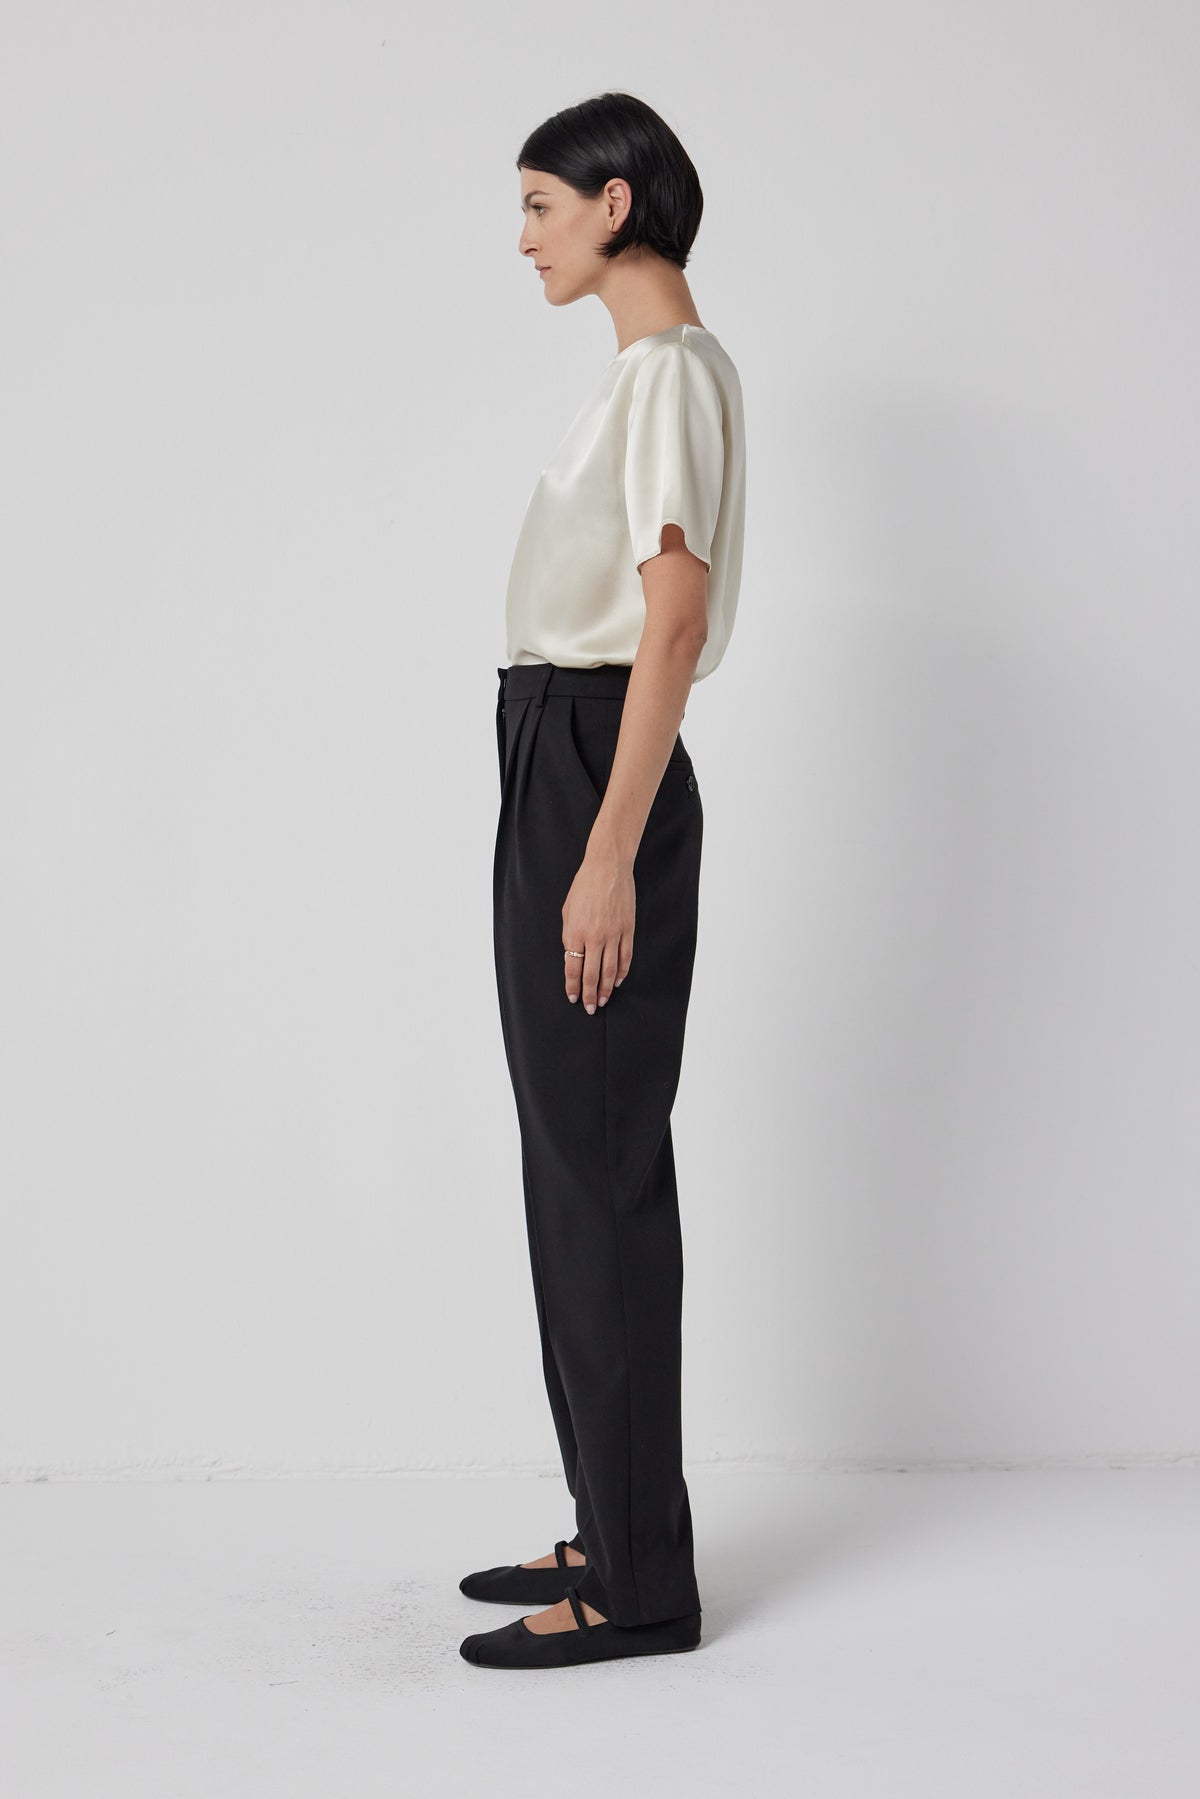 Woman in a business casual outfit with a Velvet by Jenny Graham PASADENA TOP and black trousers standing sideways against a white background, embodying timeless elegance.-36463793963201